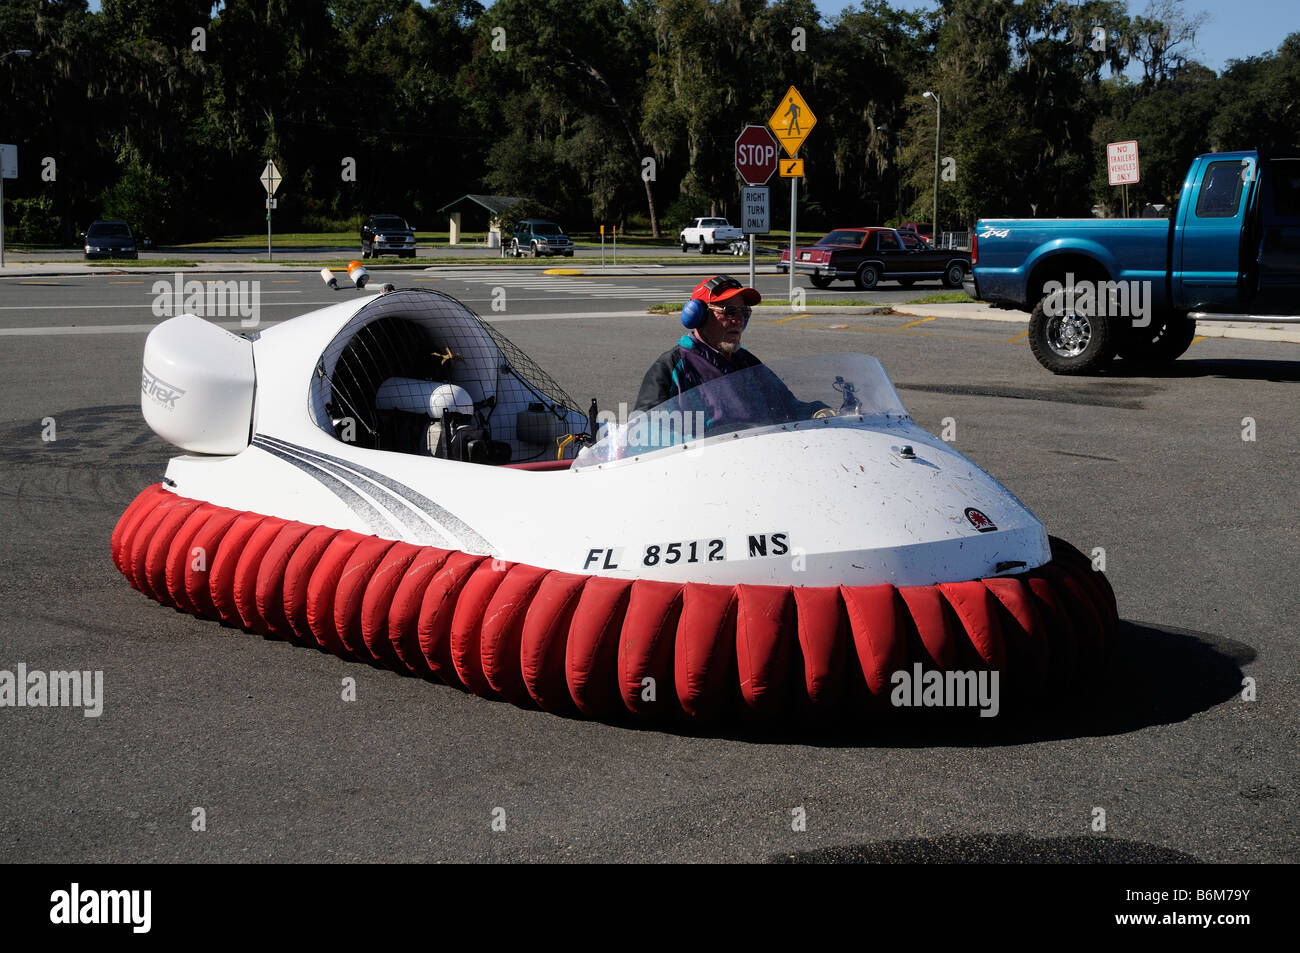 Personnel hovercraft and pilot seen in Inverness city Florida USA Stock Photo